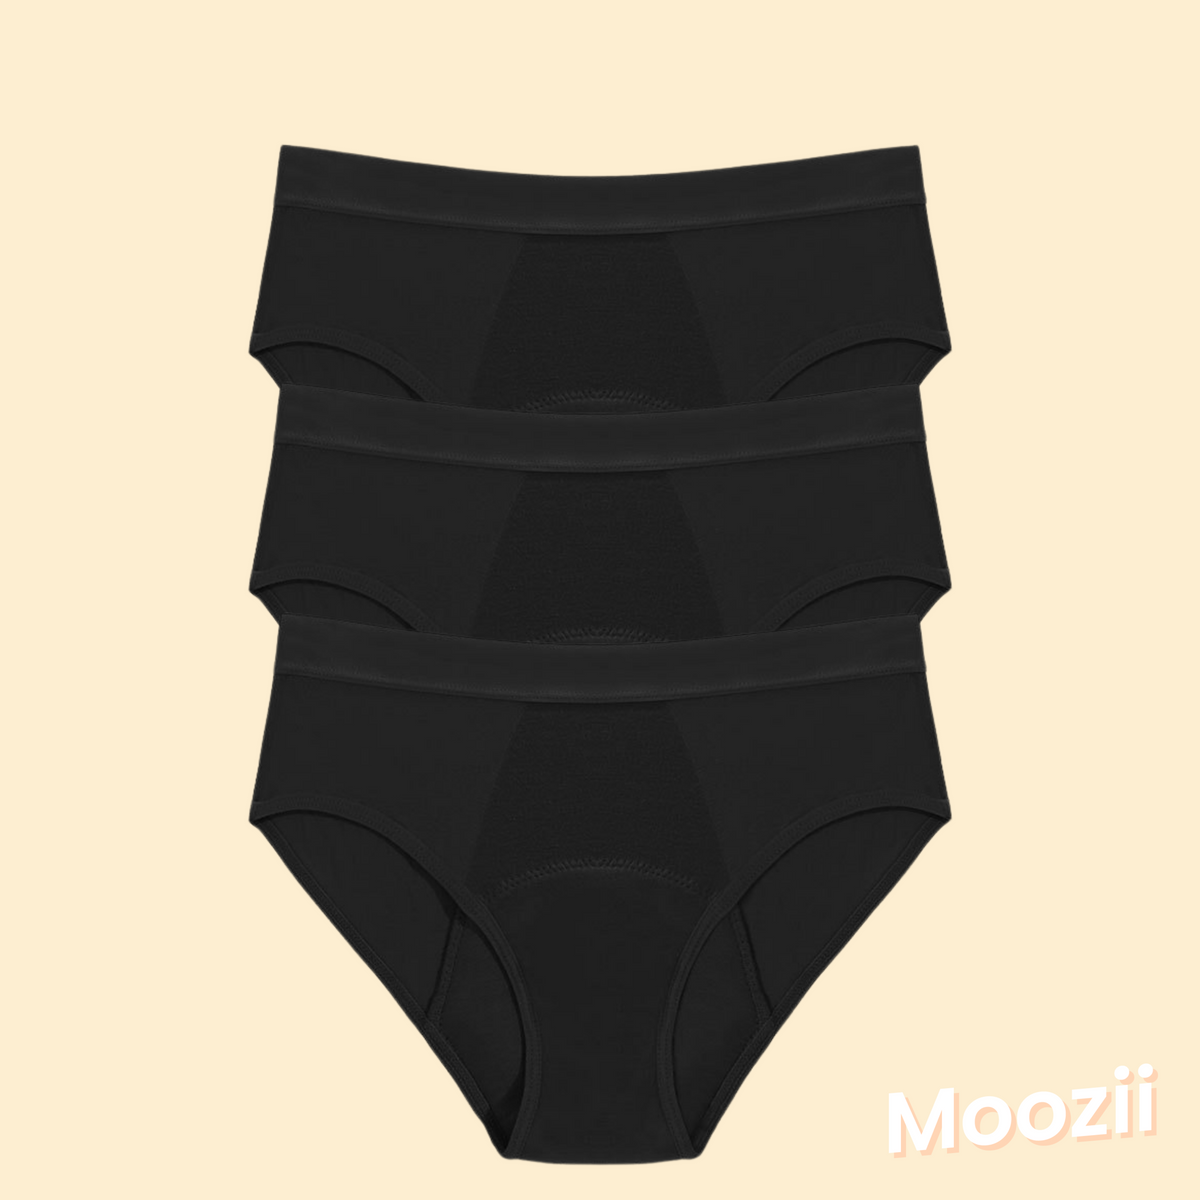 MOOZII MID RISE REUSABLE PERIOD UNDERWEAR